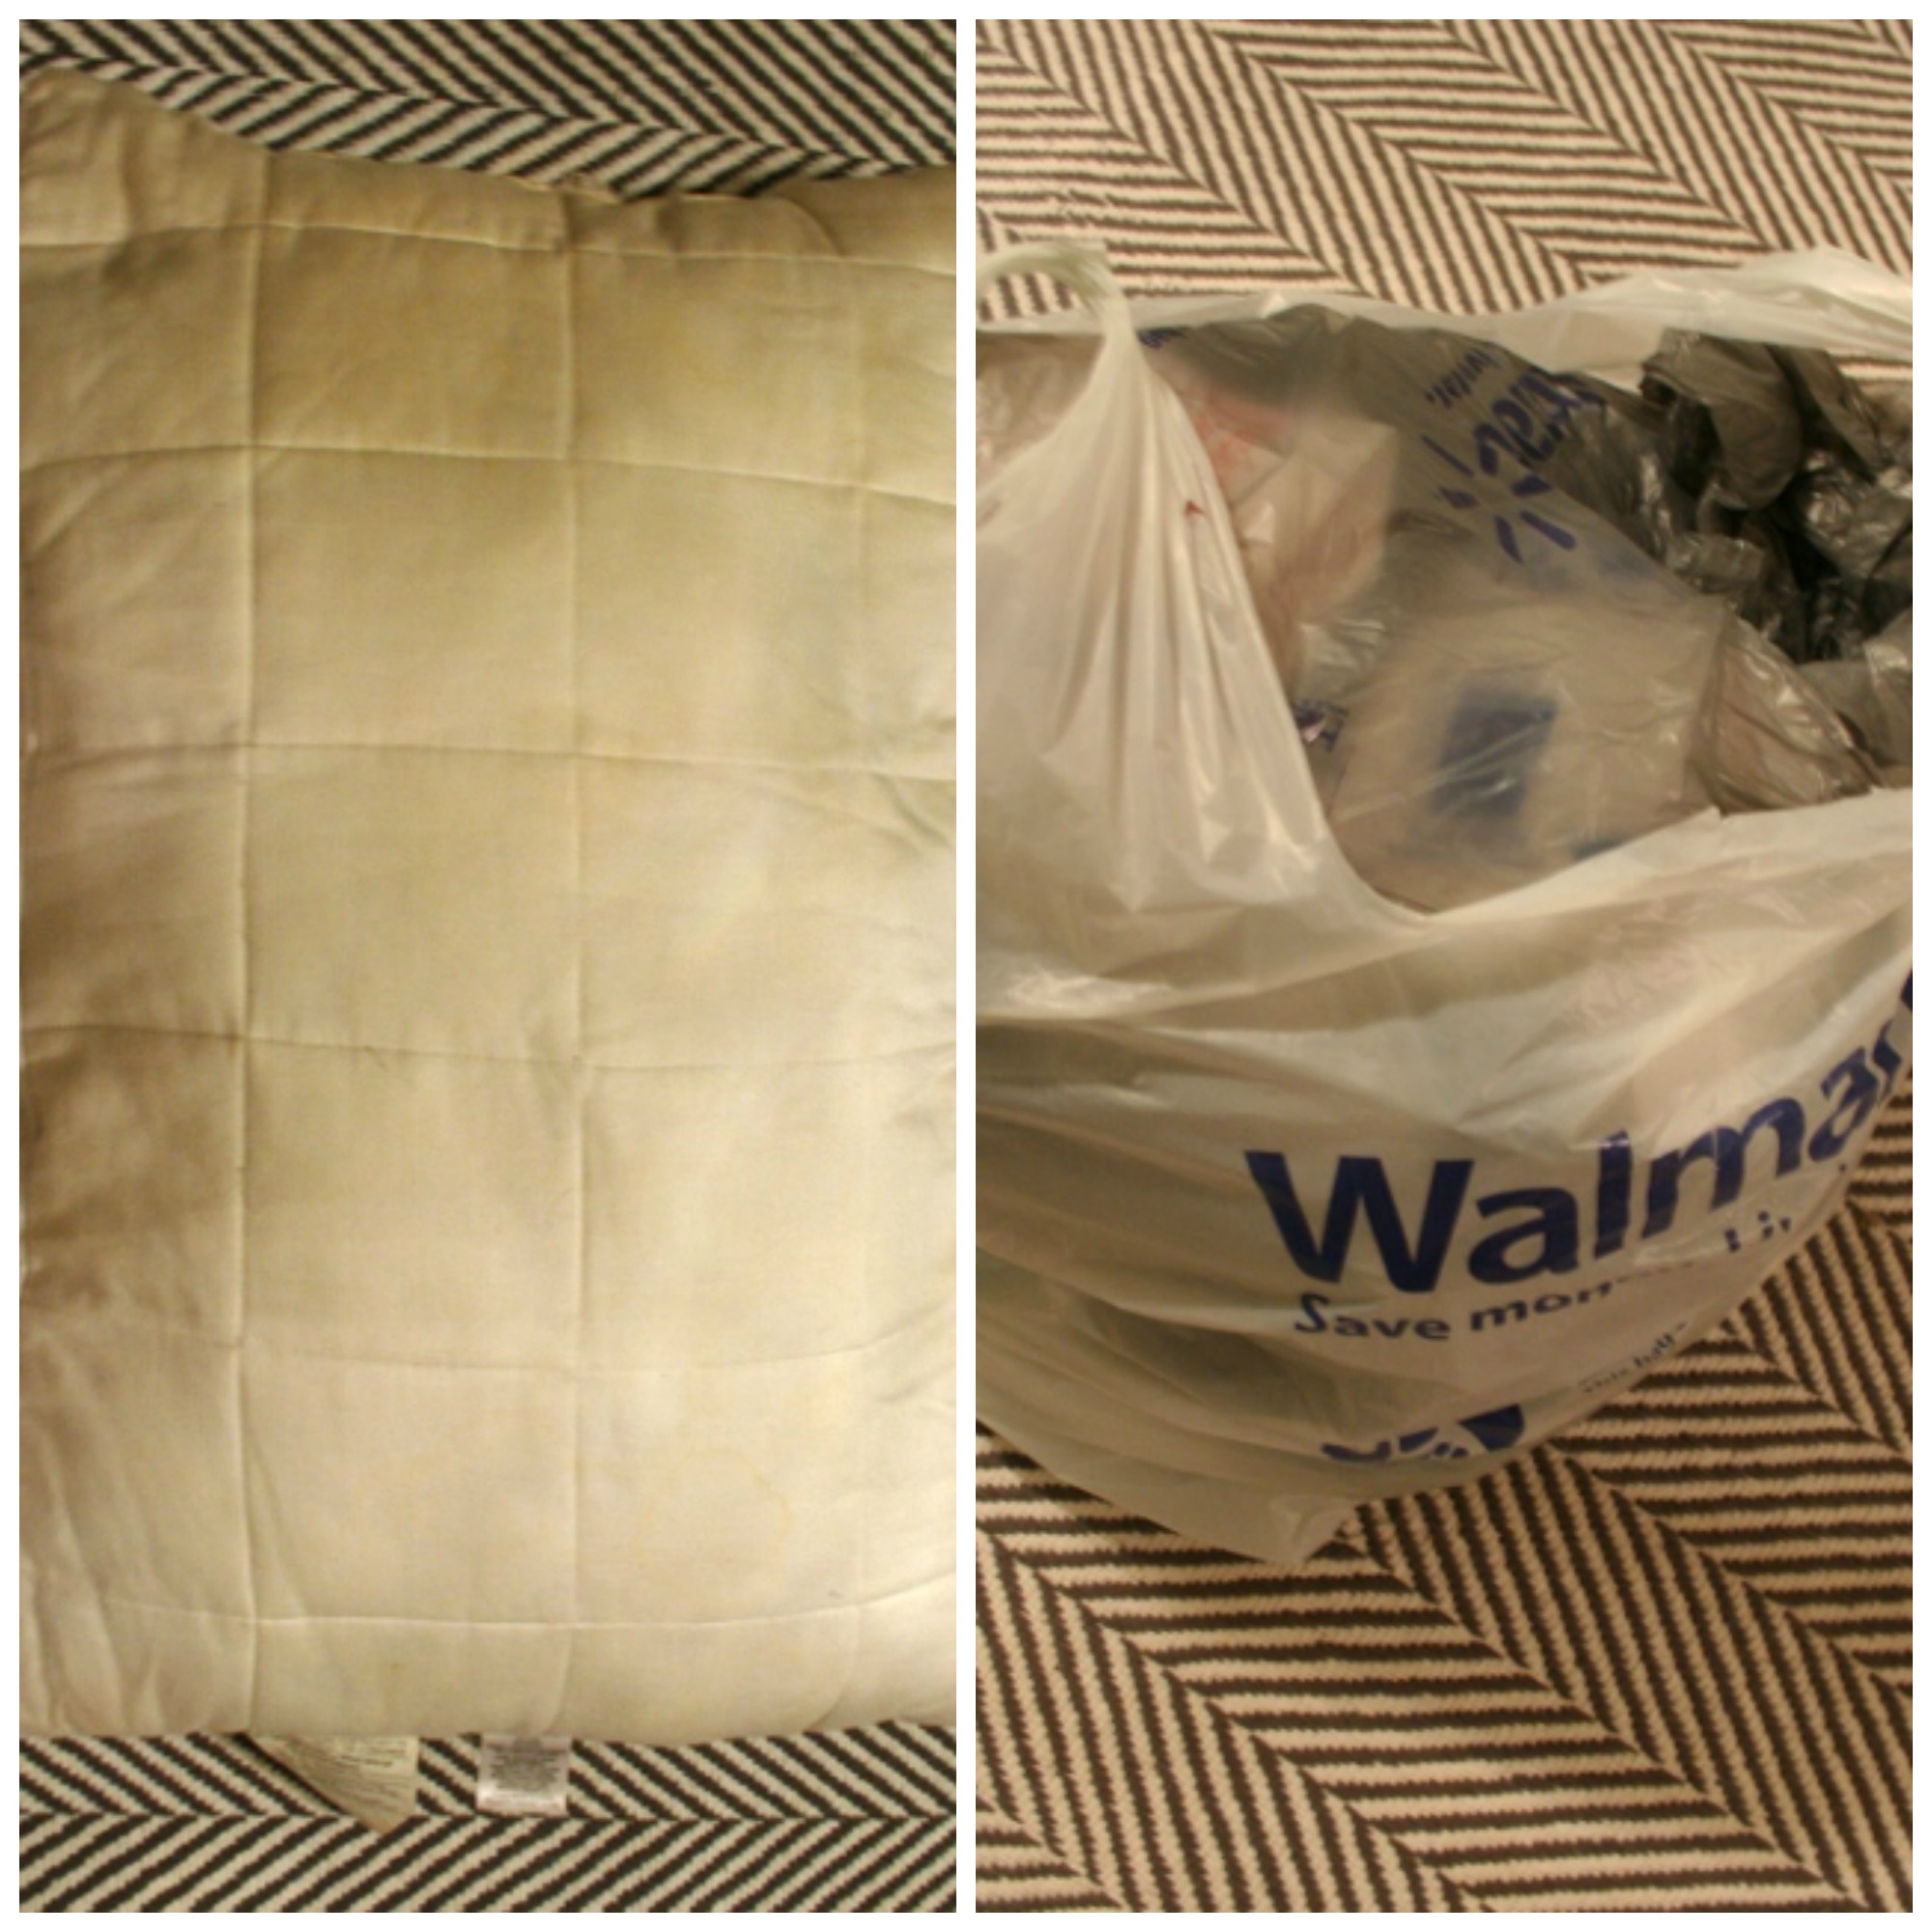 How to Make Beautiful Throw Pillows with Plastic Bag Filling